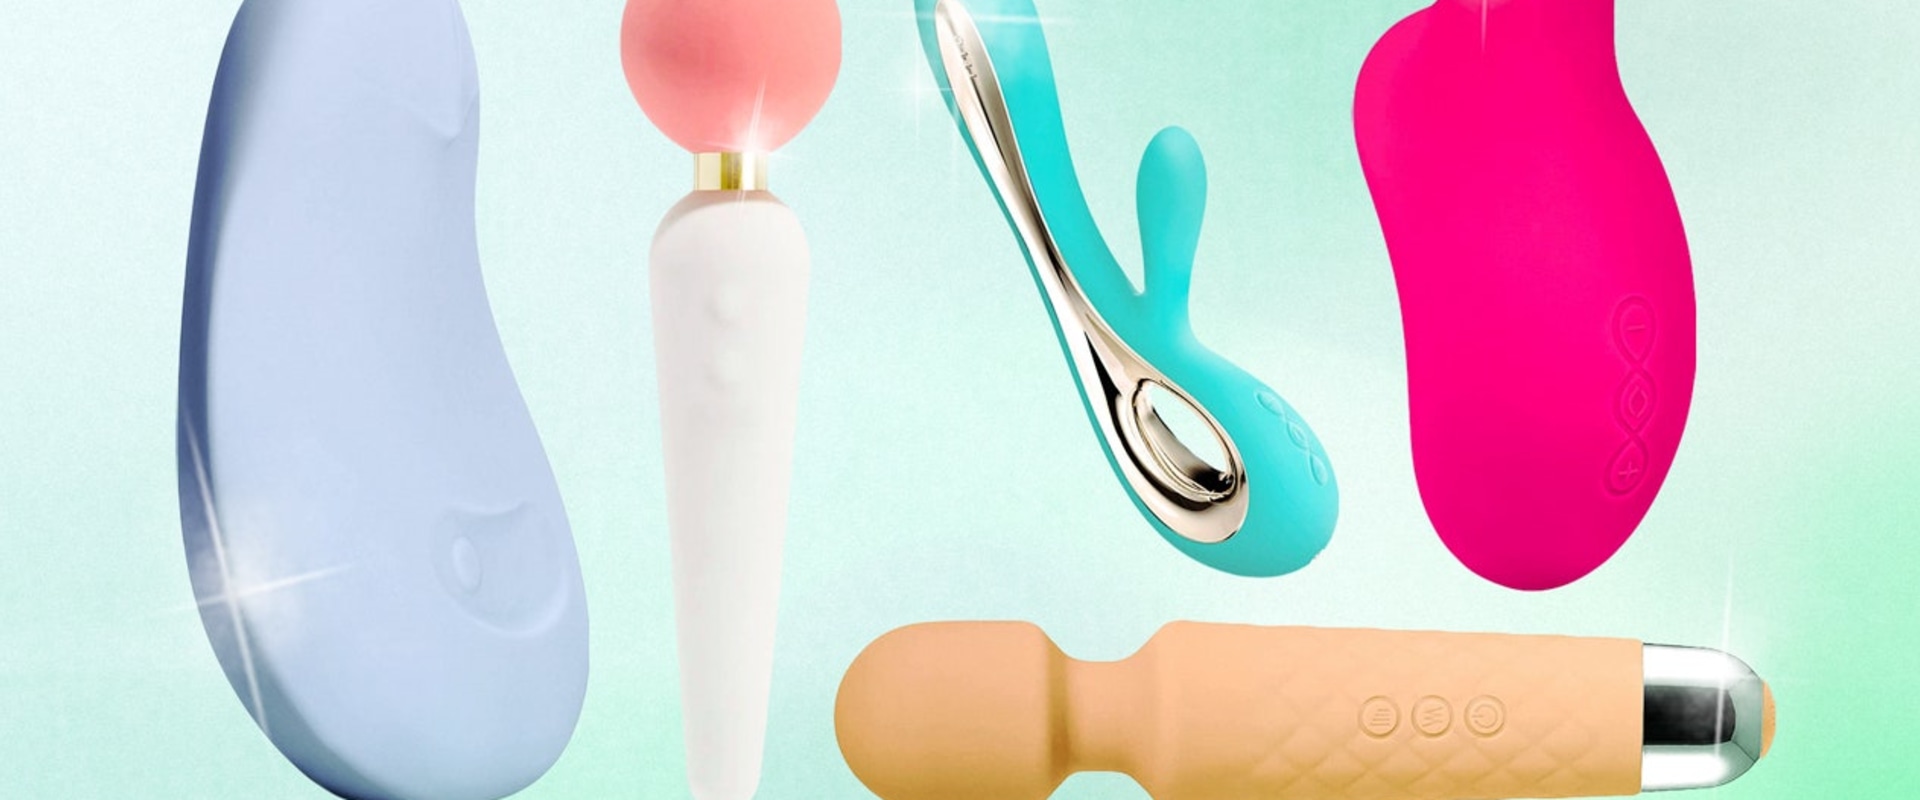 The Ultimate Guide to Choosing the Best Vibrator for You